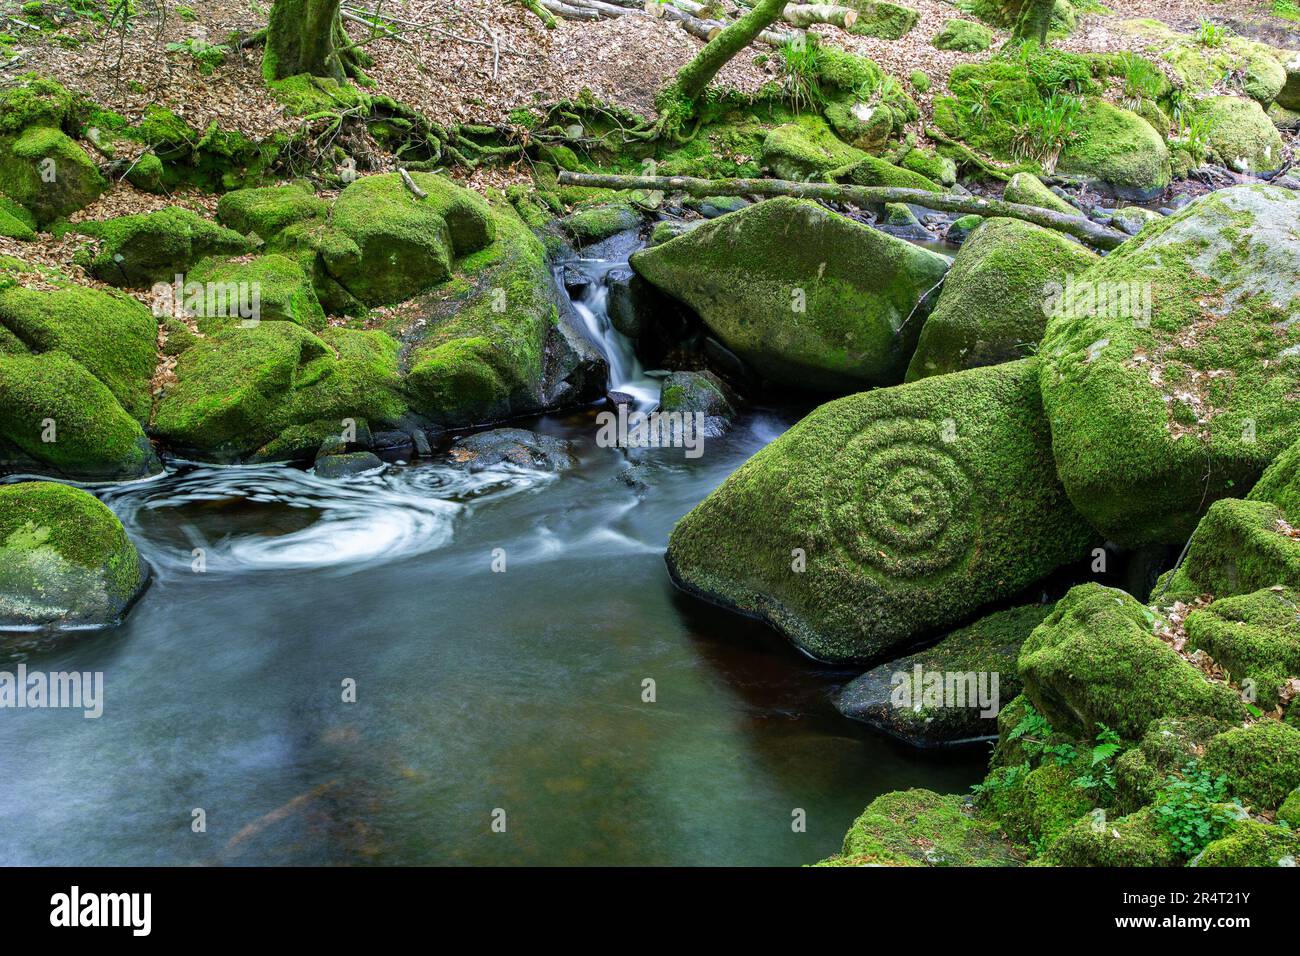 Celtic Spiral auf Mossy Rock in Cloghleagh, County Wicklow Stockfoto